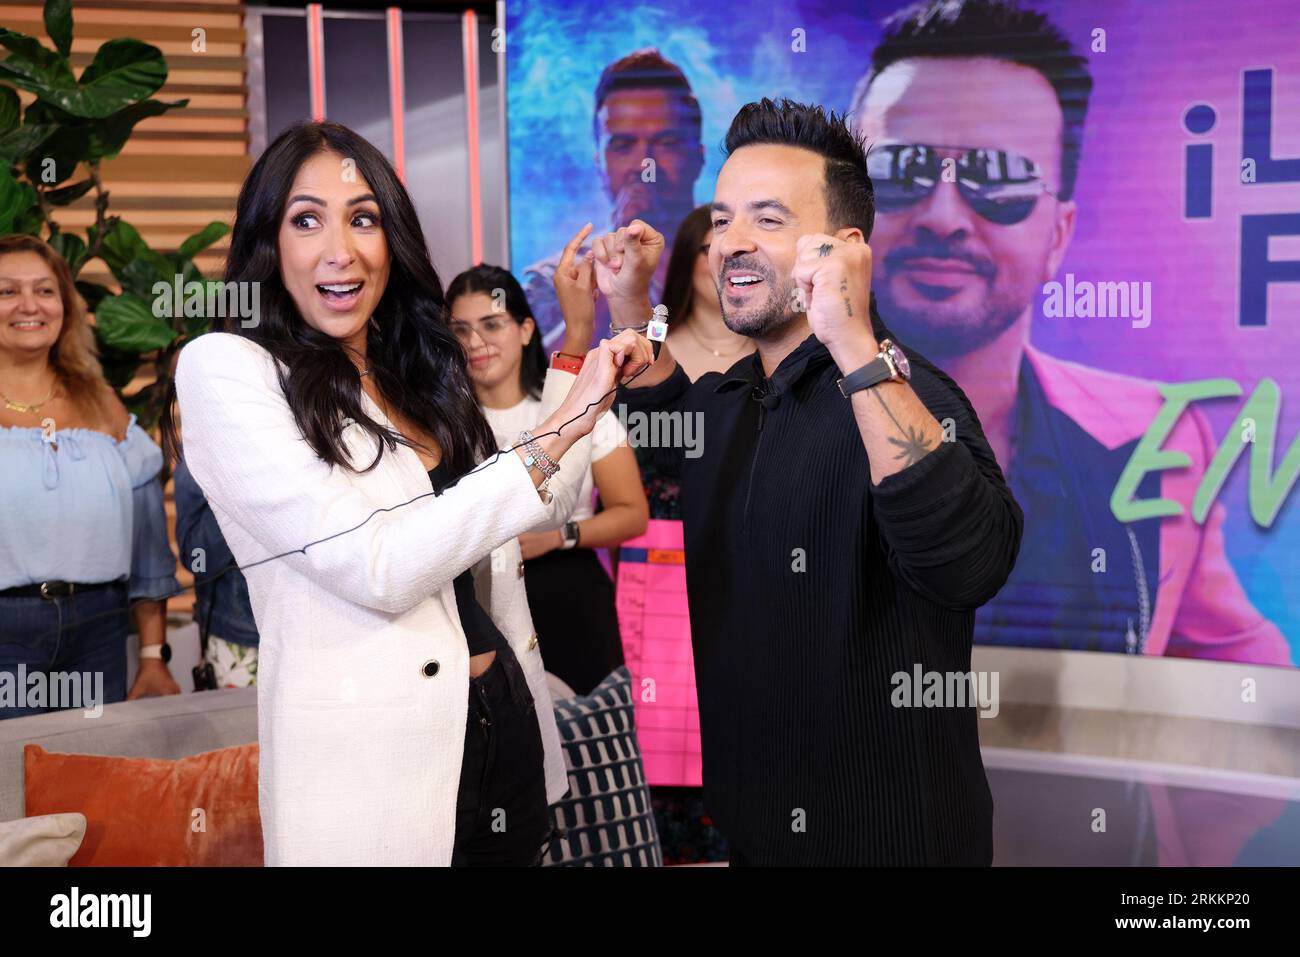 Miami, United States Of America. 25th Aug, 2023. DORAL, FL-AUG 25: Cynthia Urias and Luis Fonsi are seen during Univision “Despierta America” on August 25, 2023 in Doral, Florida. (Photo by Alberto E. Tamargo/Sipa USA) Credit: Sipa USA/Alamy Live News Stock Photo